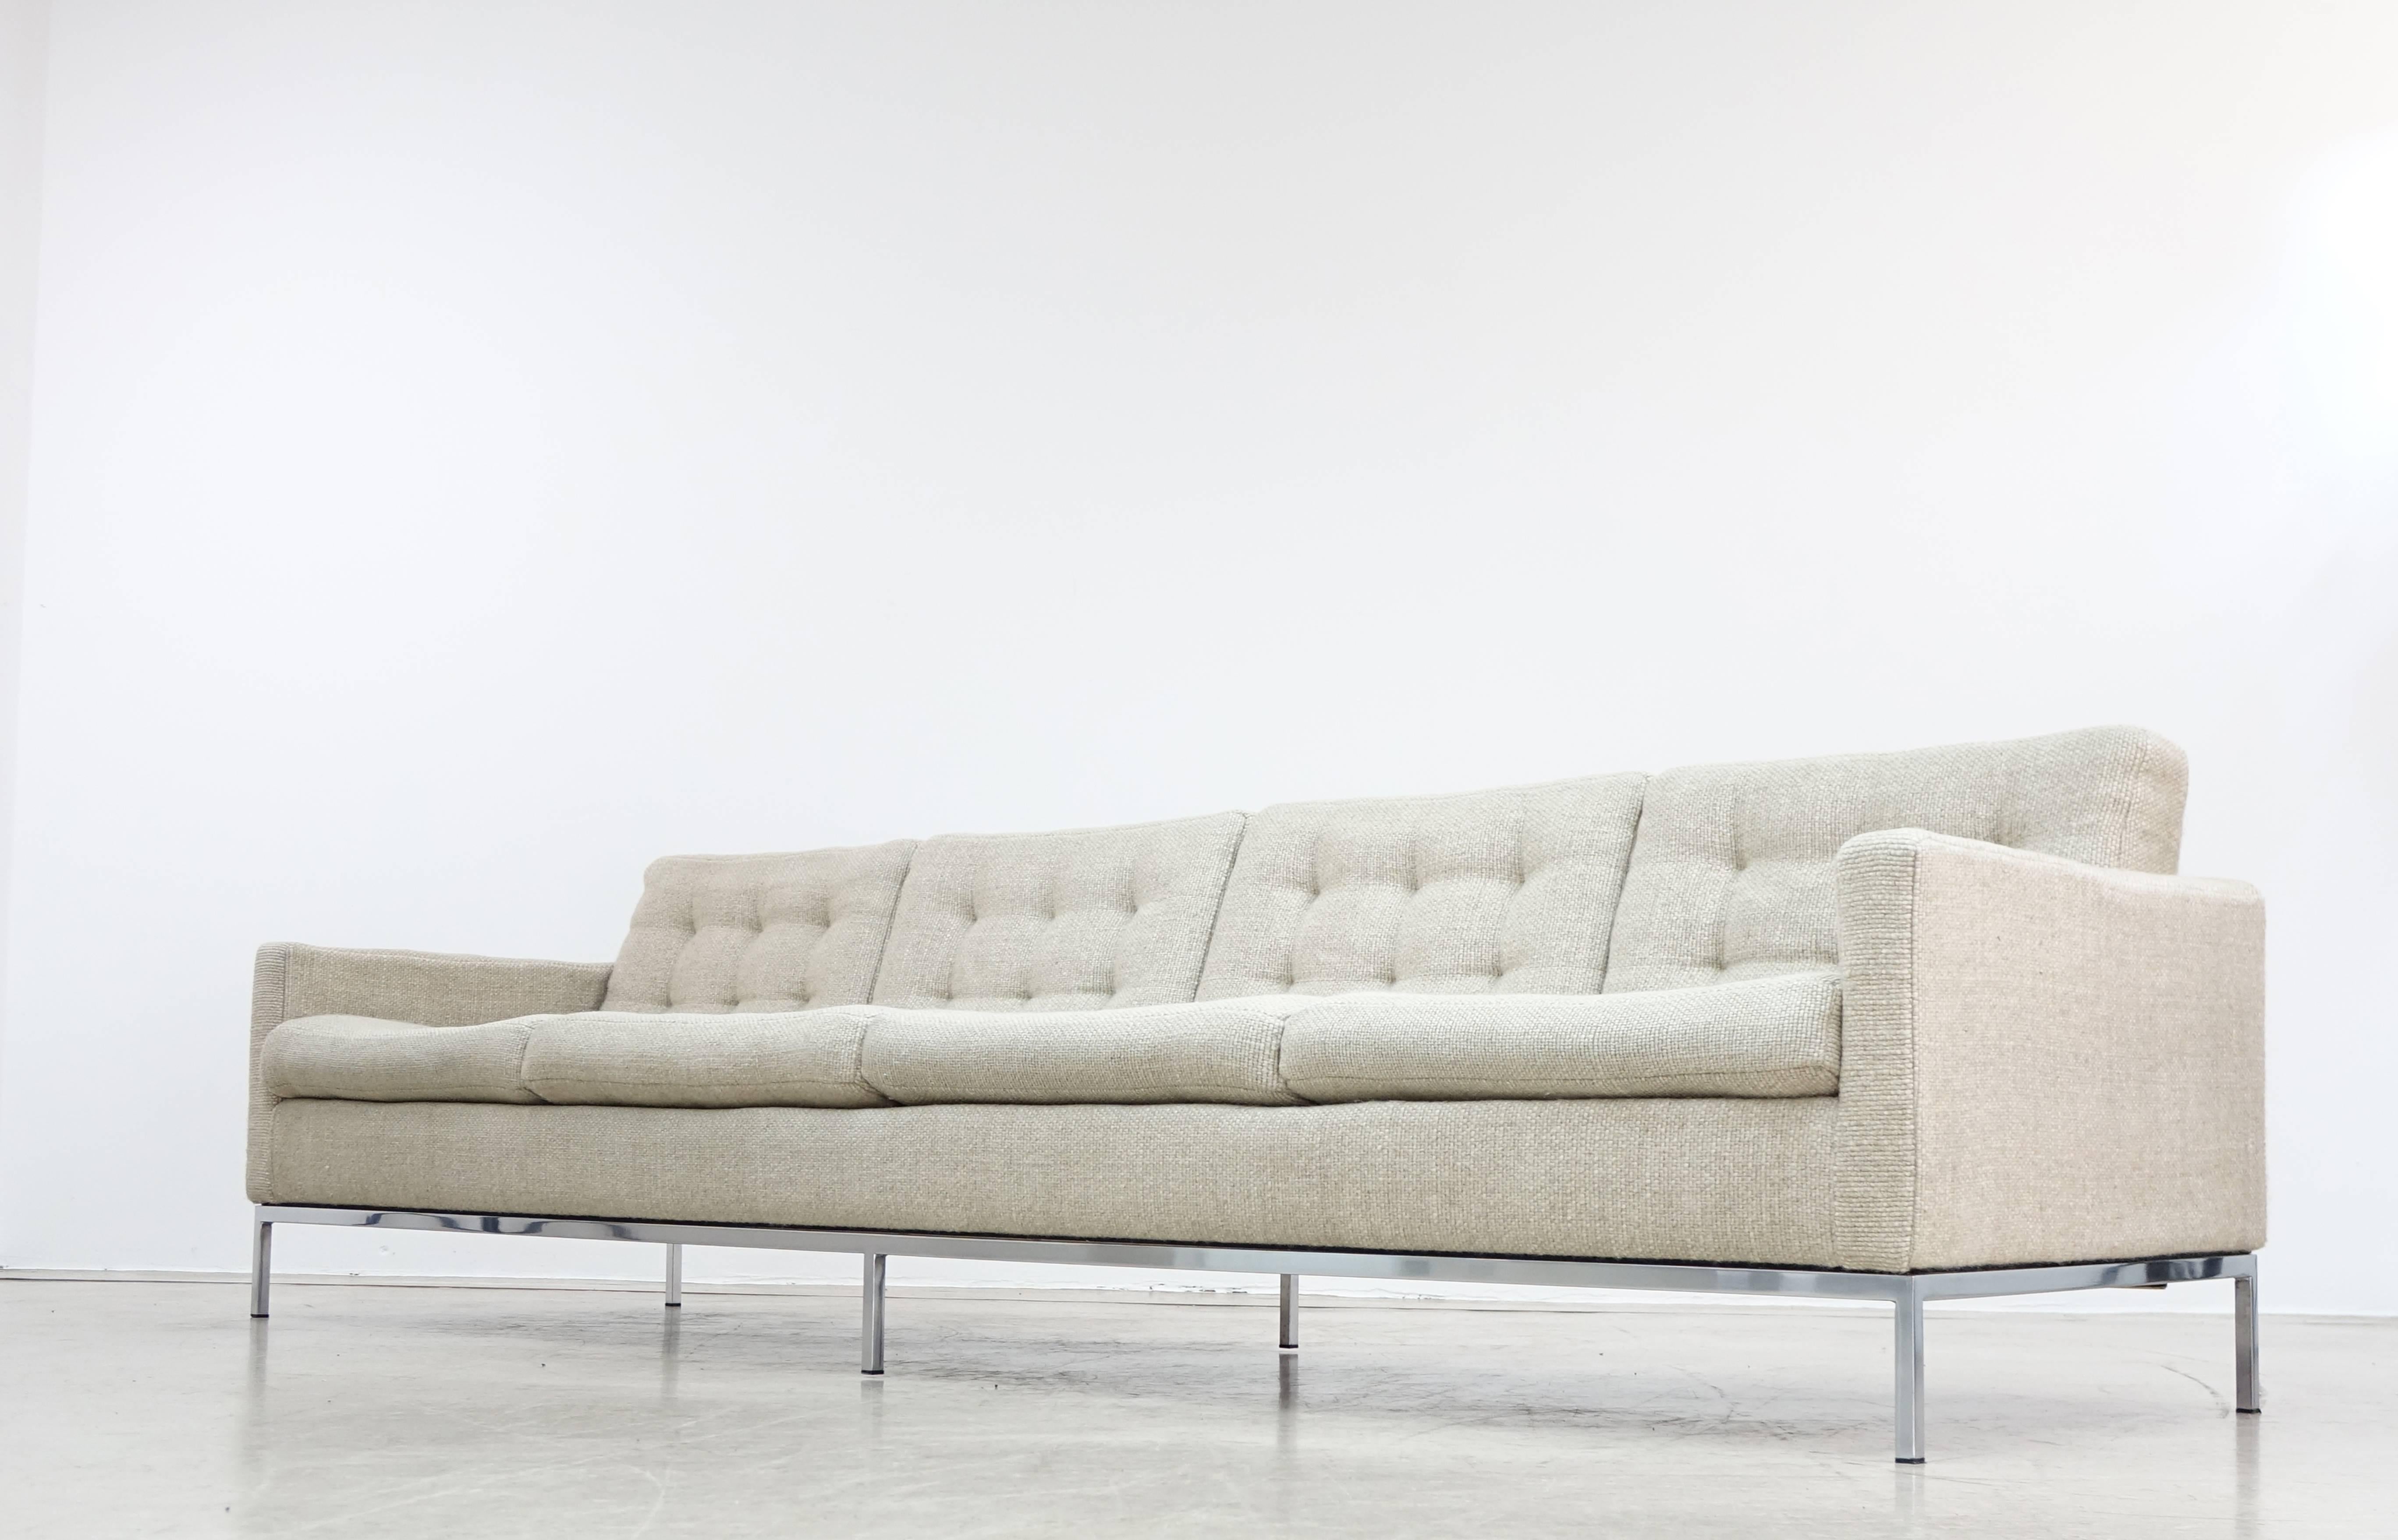 Designer: Florence Knoll 
by Knoll International.
Modell: 3207C.
Custom-made as four-seat sofa by Knoll in 1966.

Fabric - Marroko sand K935/00 / original invoice dated 1966 comes with it.
 